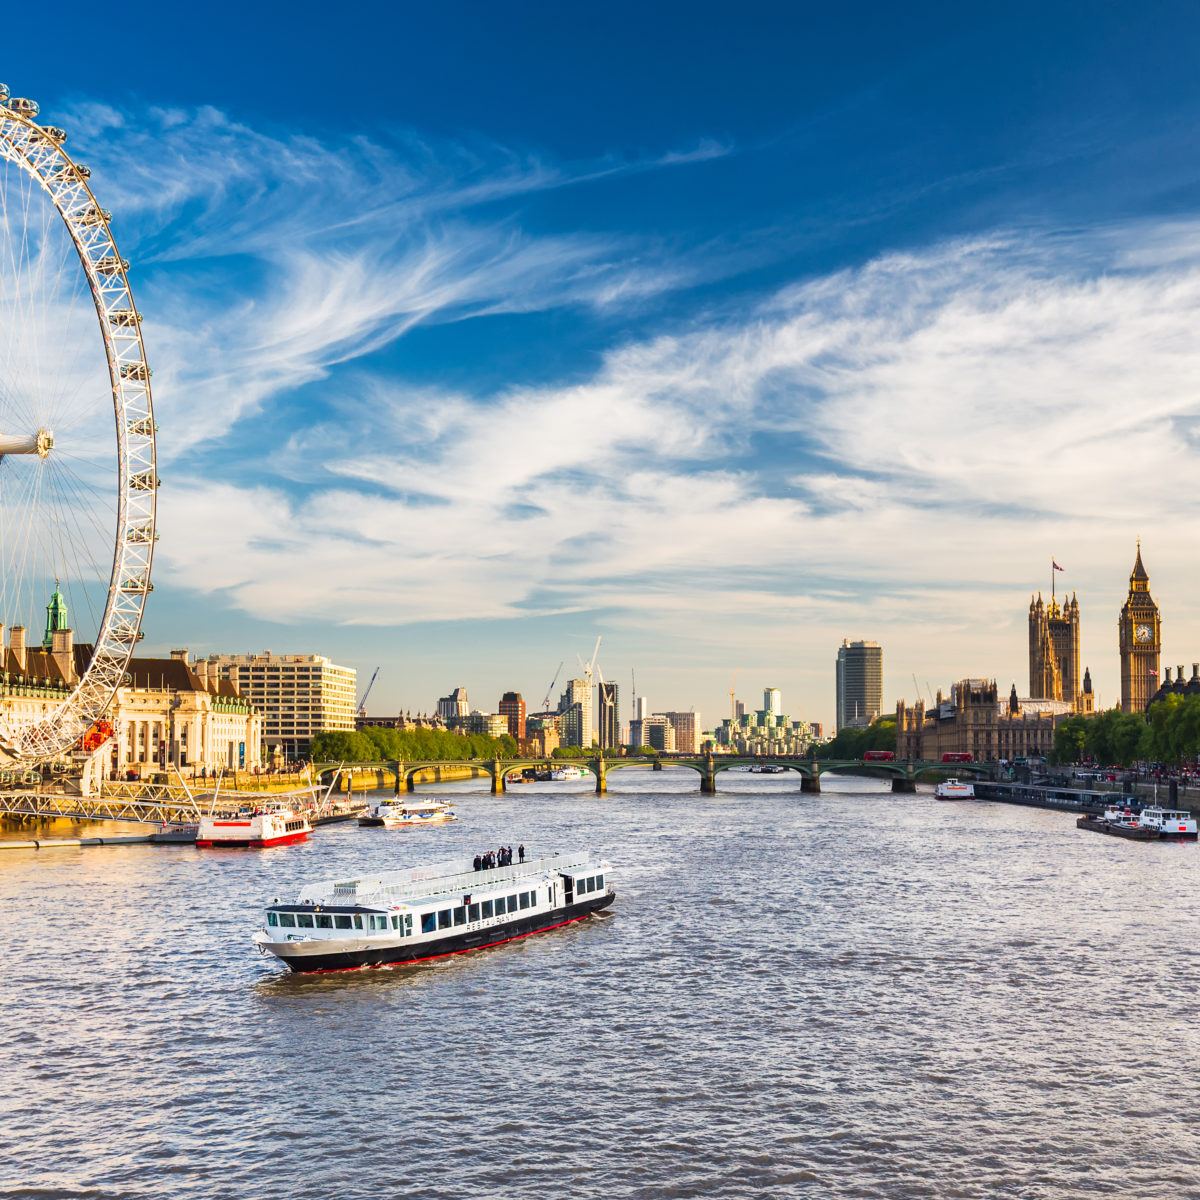 An image of Westminster in London, with the London Eye looking over the River Thames